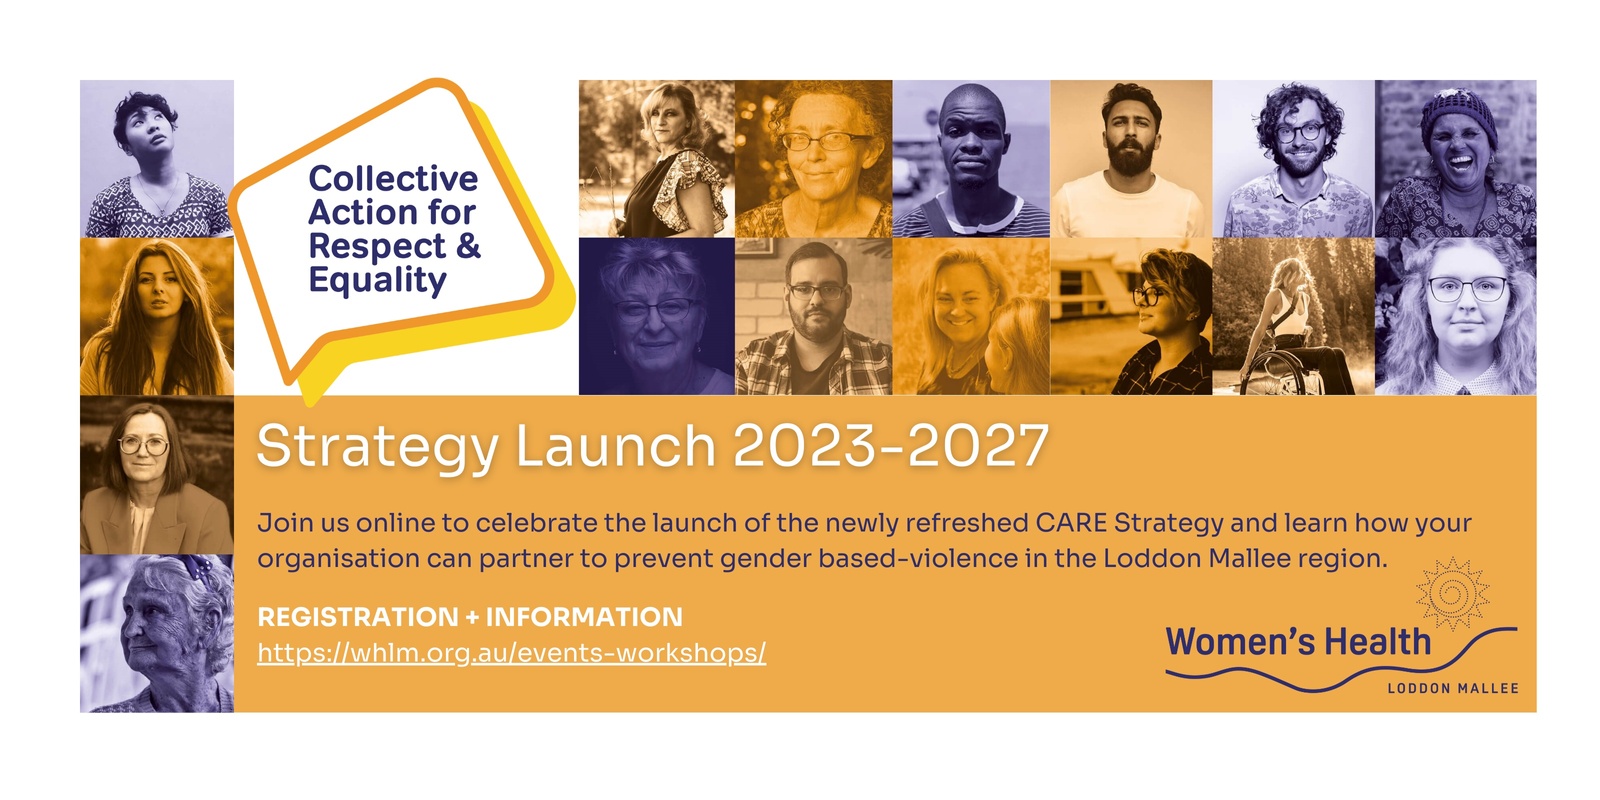 CARE Strategy Launch - Collective Action for Respect and Equality